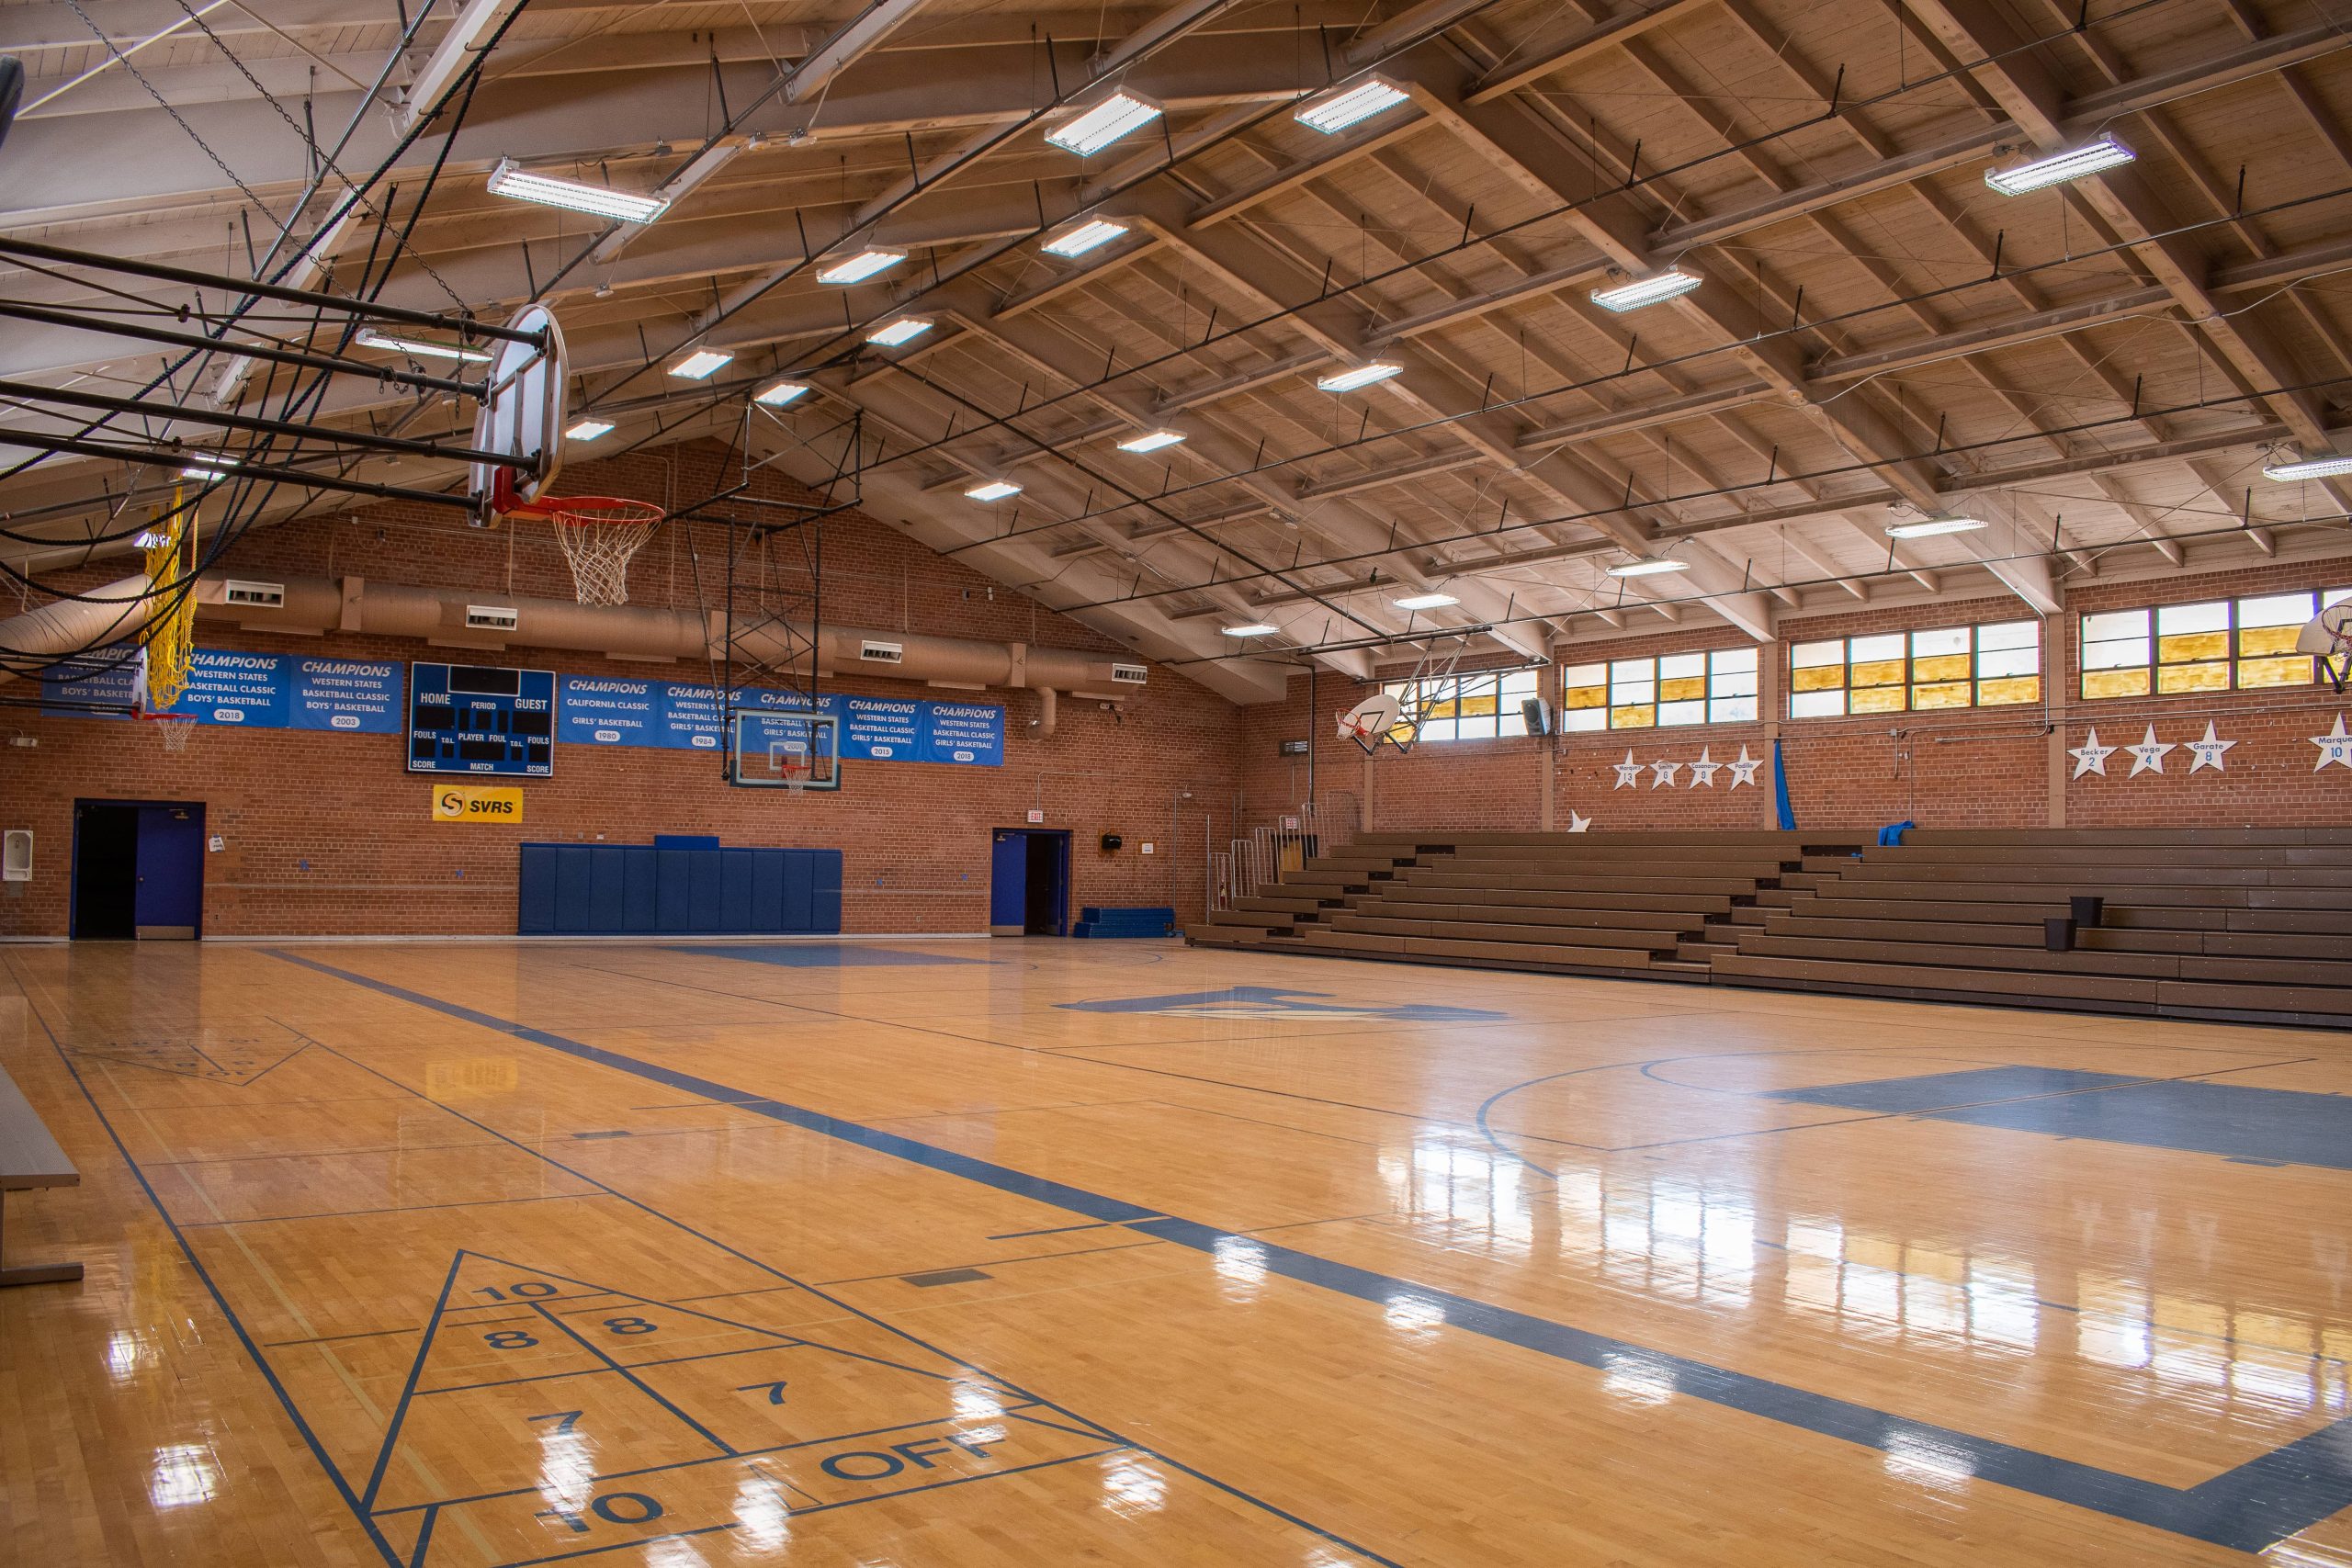 A panoramic photo of the basketball court in the large, ASDB gymnasium. The full-size court is illuminated by a series of large, overhead lights.